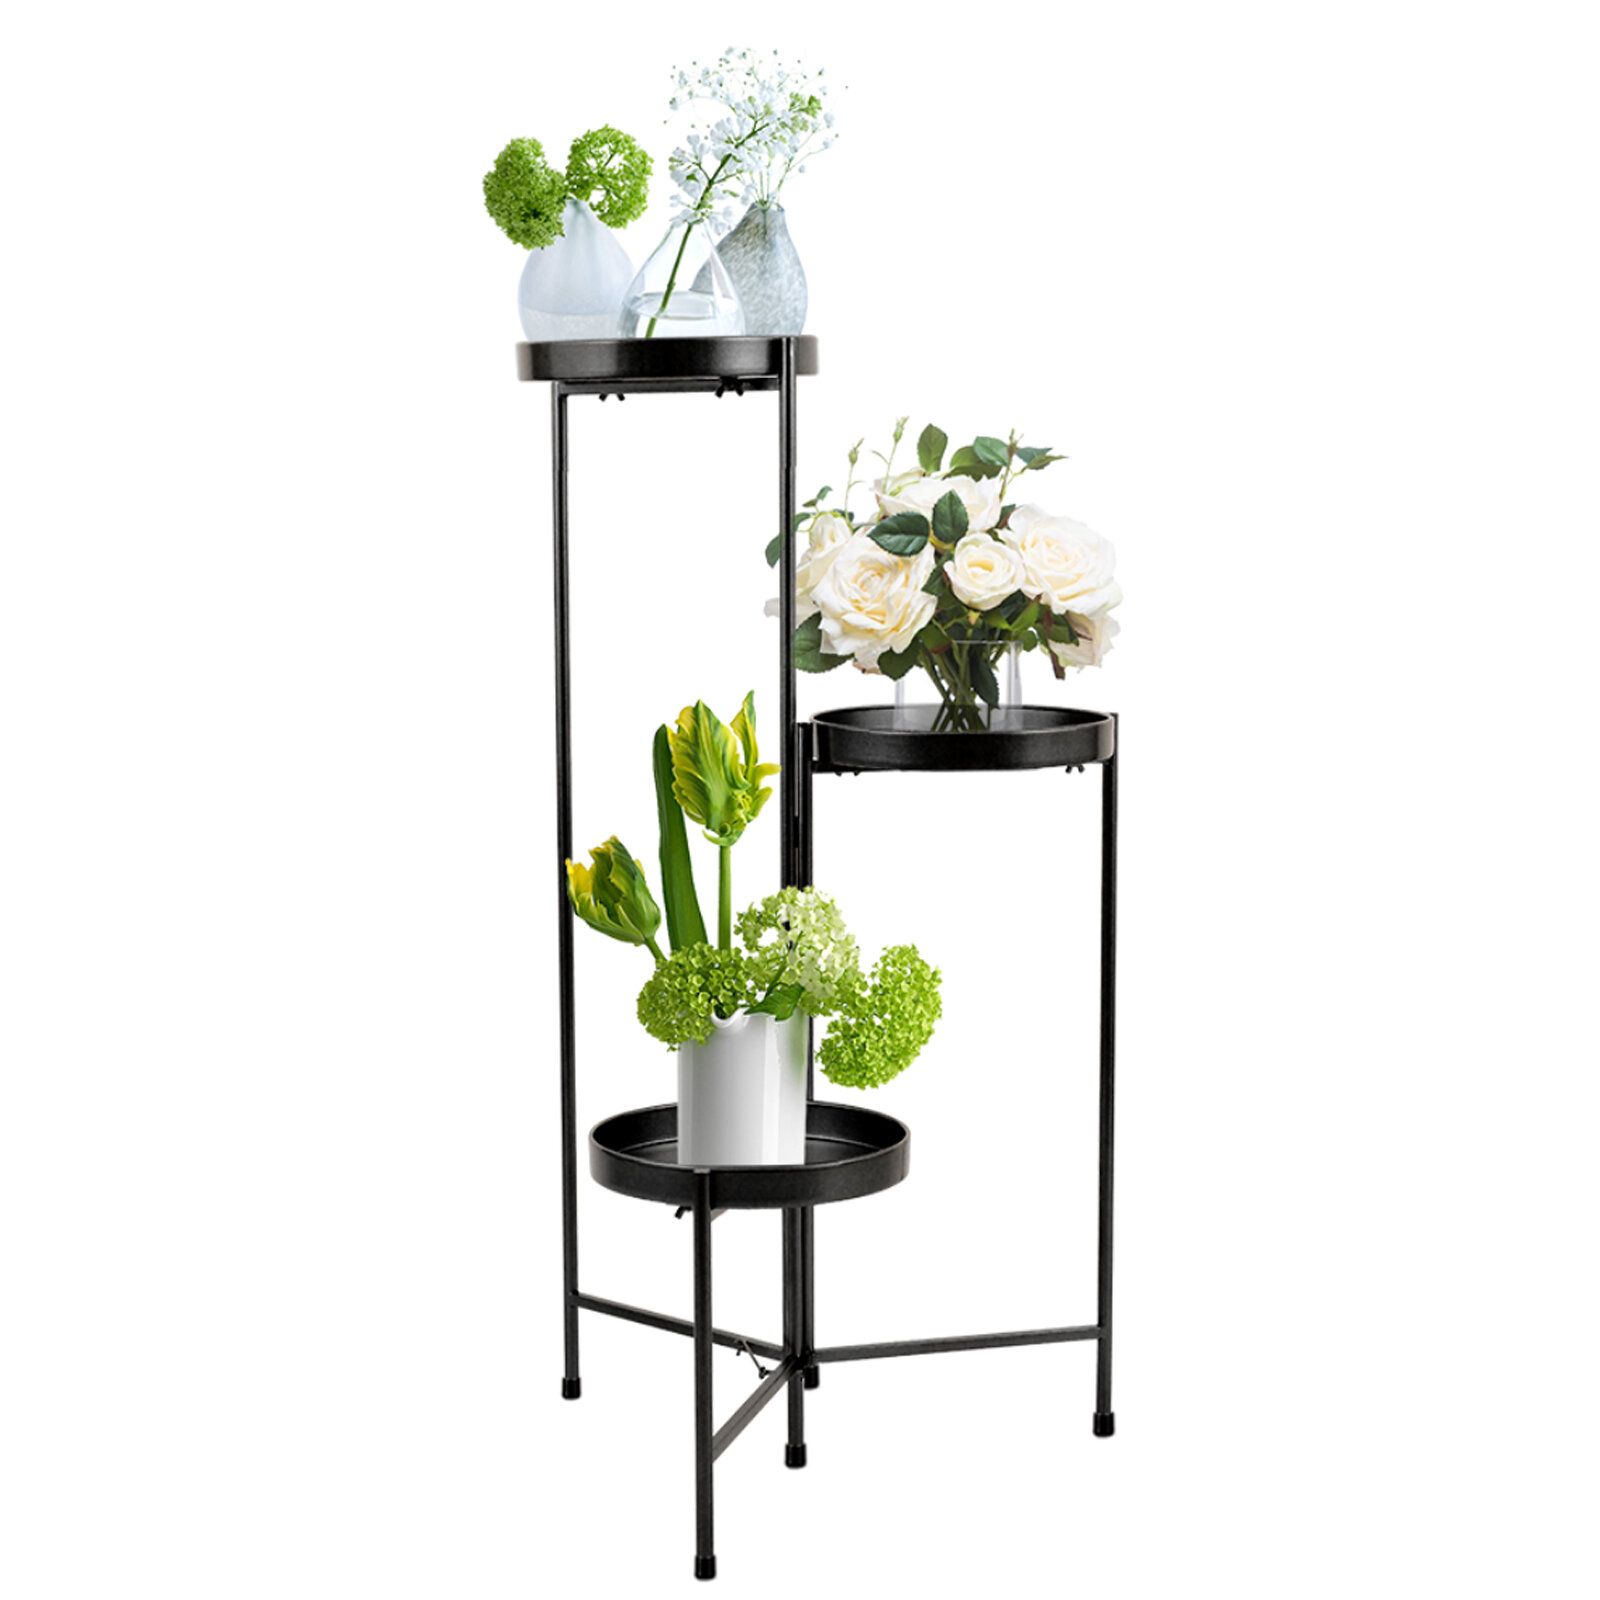 Arlmont & Co. Metal Plant Stand 3 Tier Indoor Outdoor – Flower Pot Display  Holder Wrought Iron Planter Organizer Shelf – For Living Room Garden Lawn  Patio Corner Potted Storage Rack & Reviews | Wayfair Regarding Three Tier Plant Stands (Photo 13 of 15)